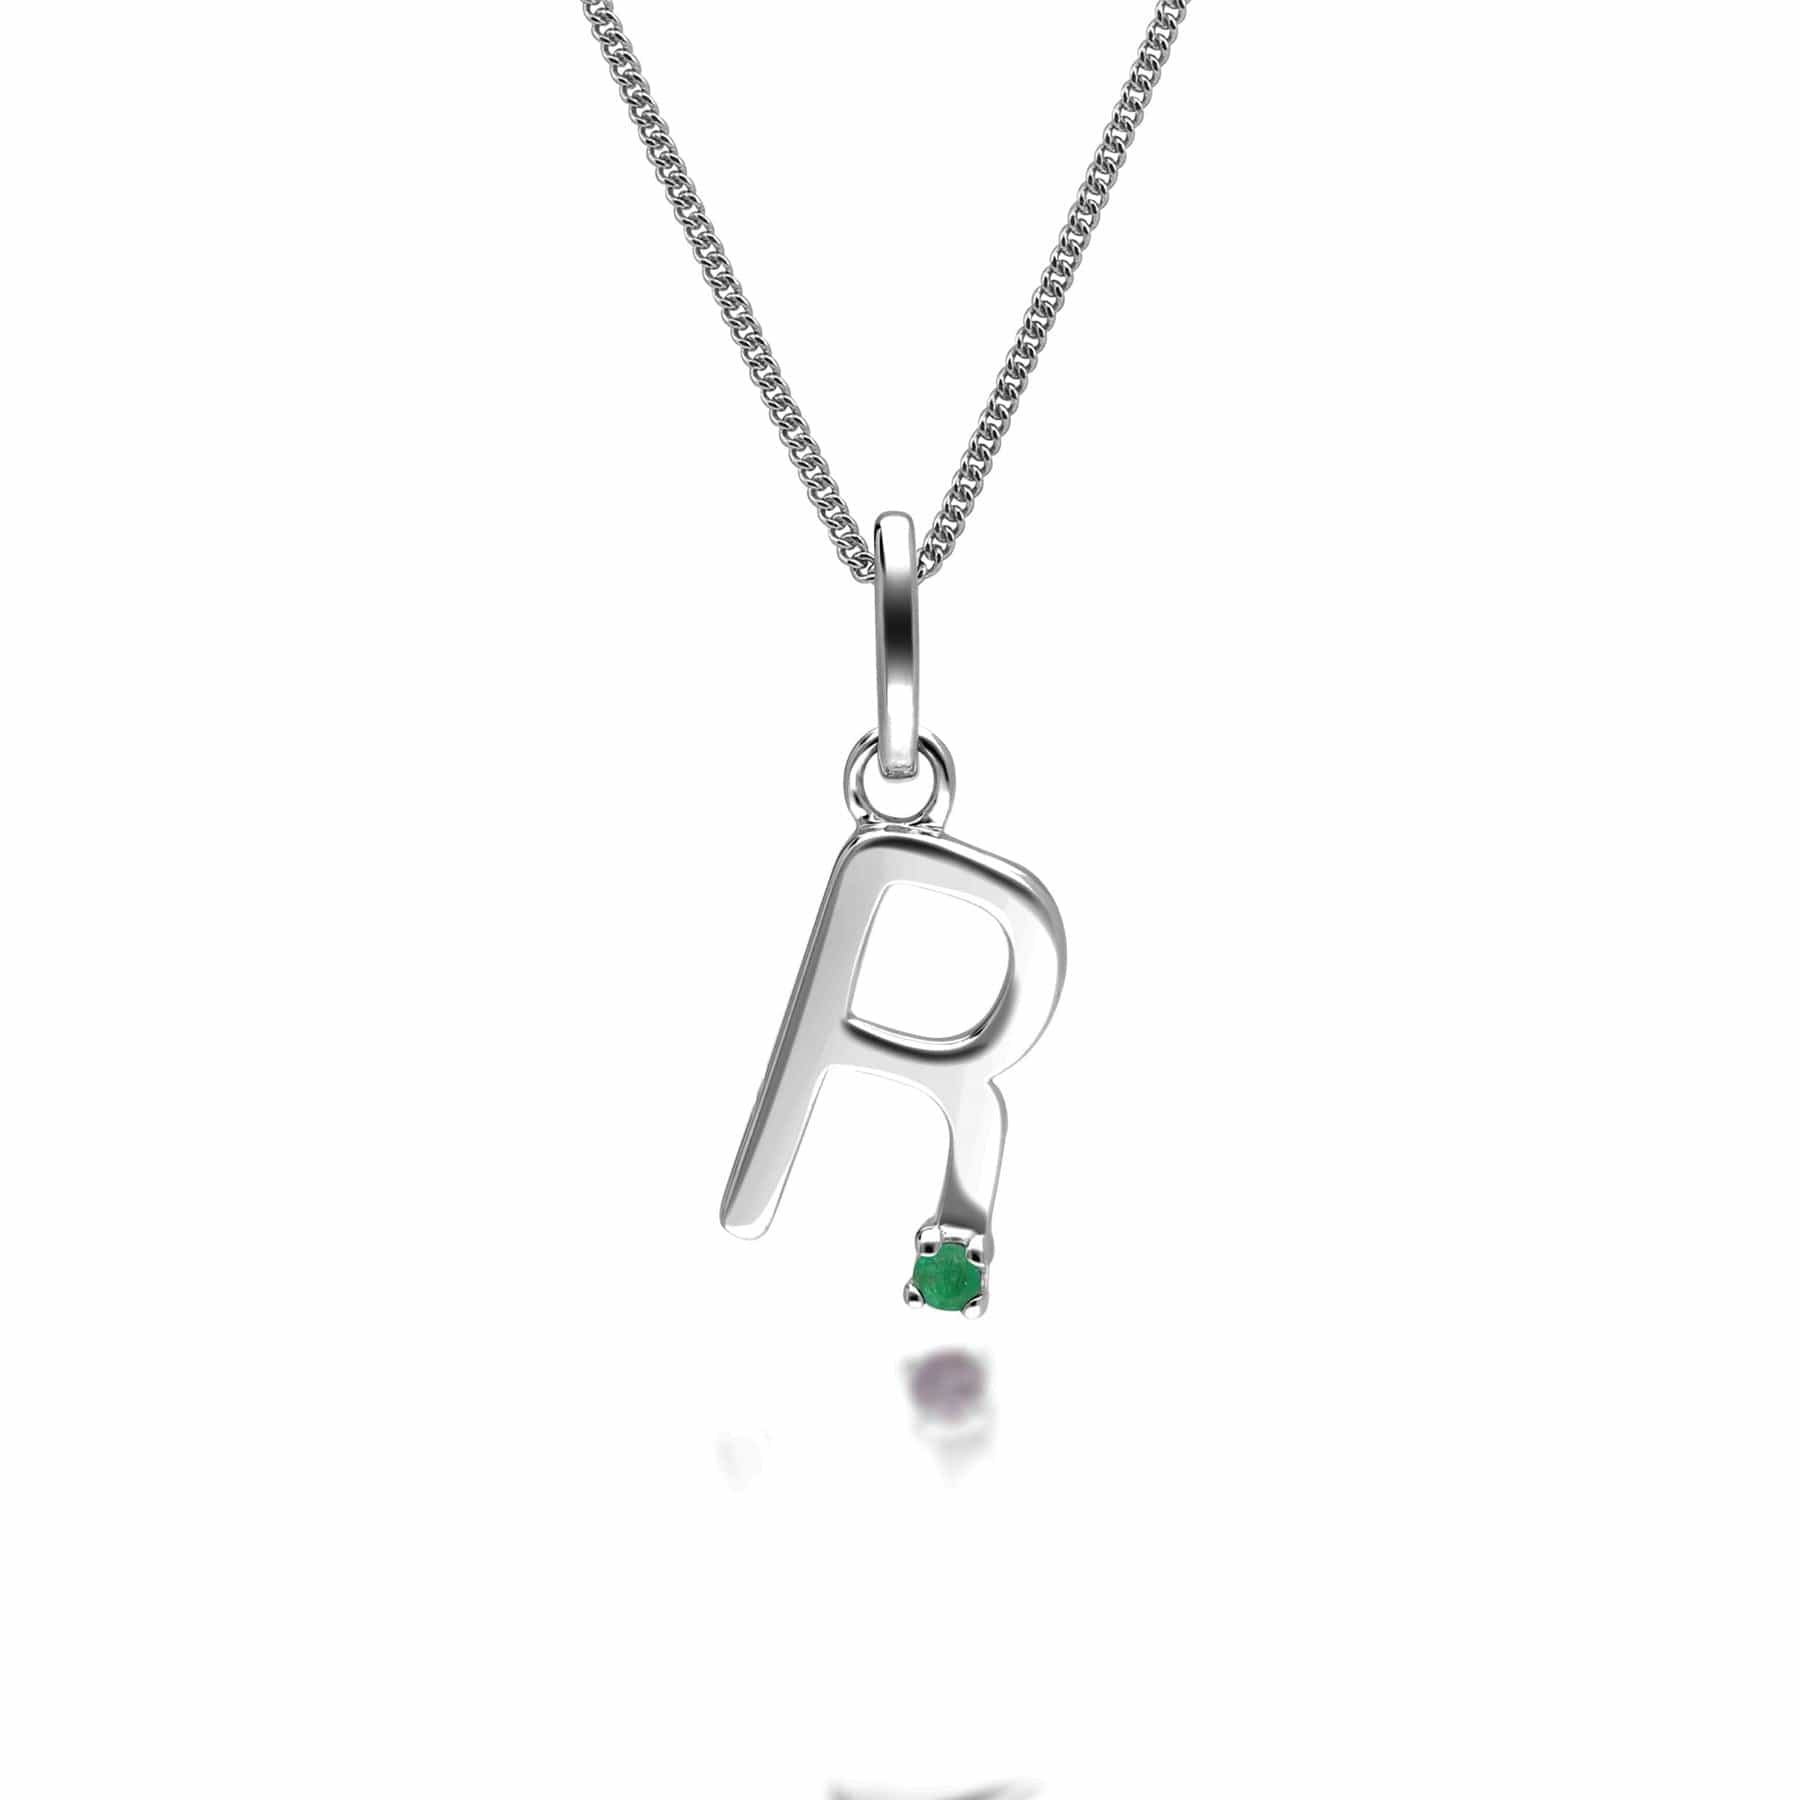 162P0252019 Initial Emerald Letter Charm Necklace in 9ct White Gold 16